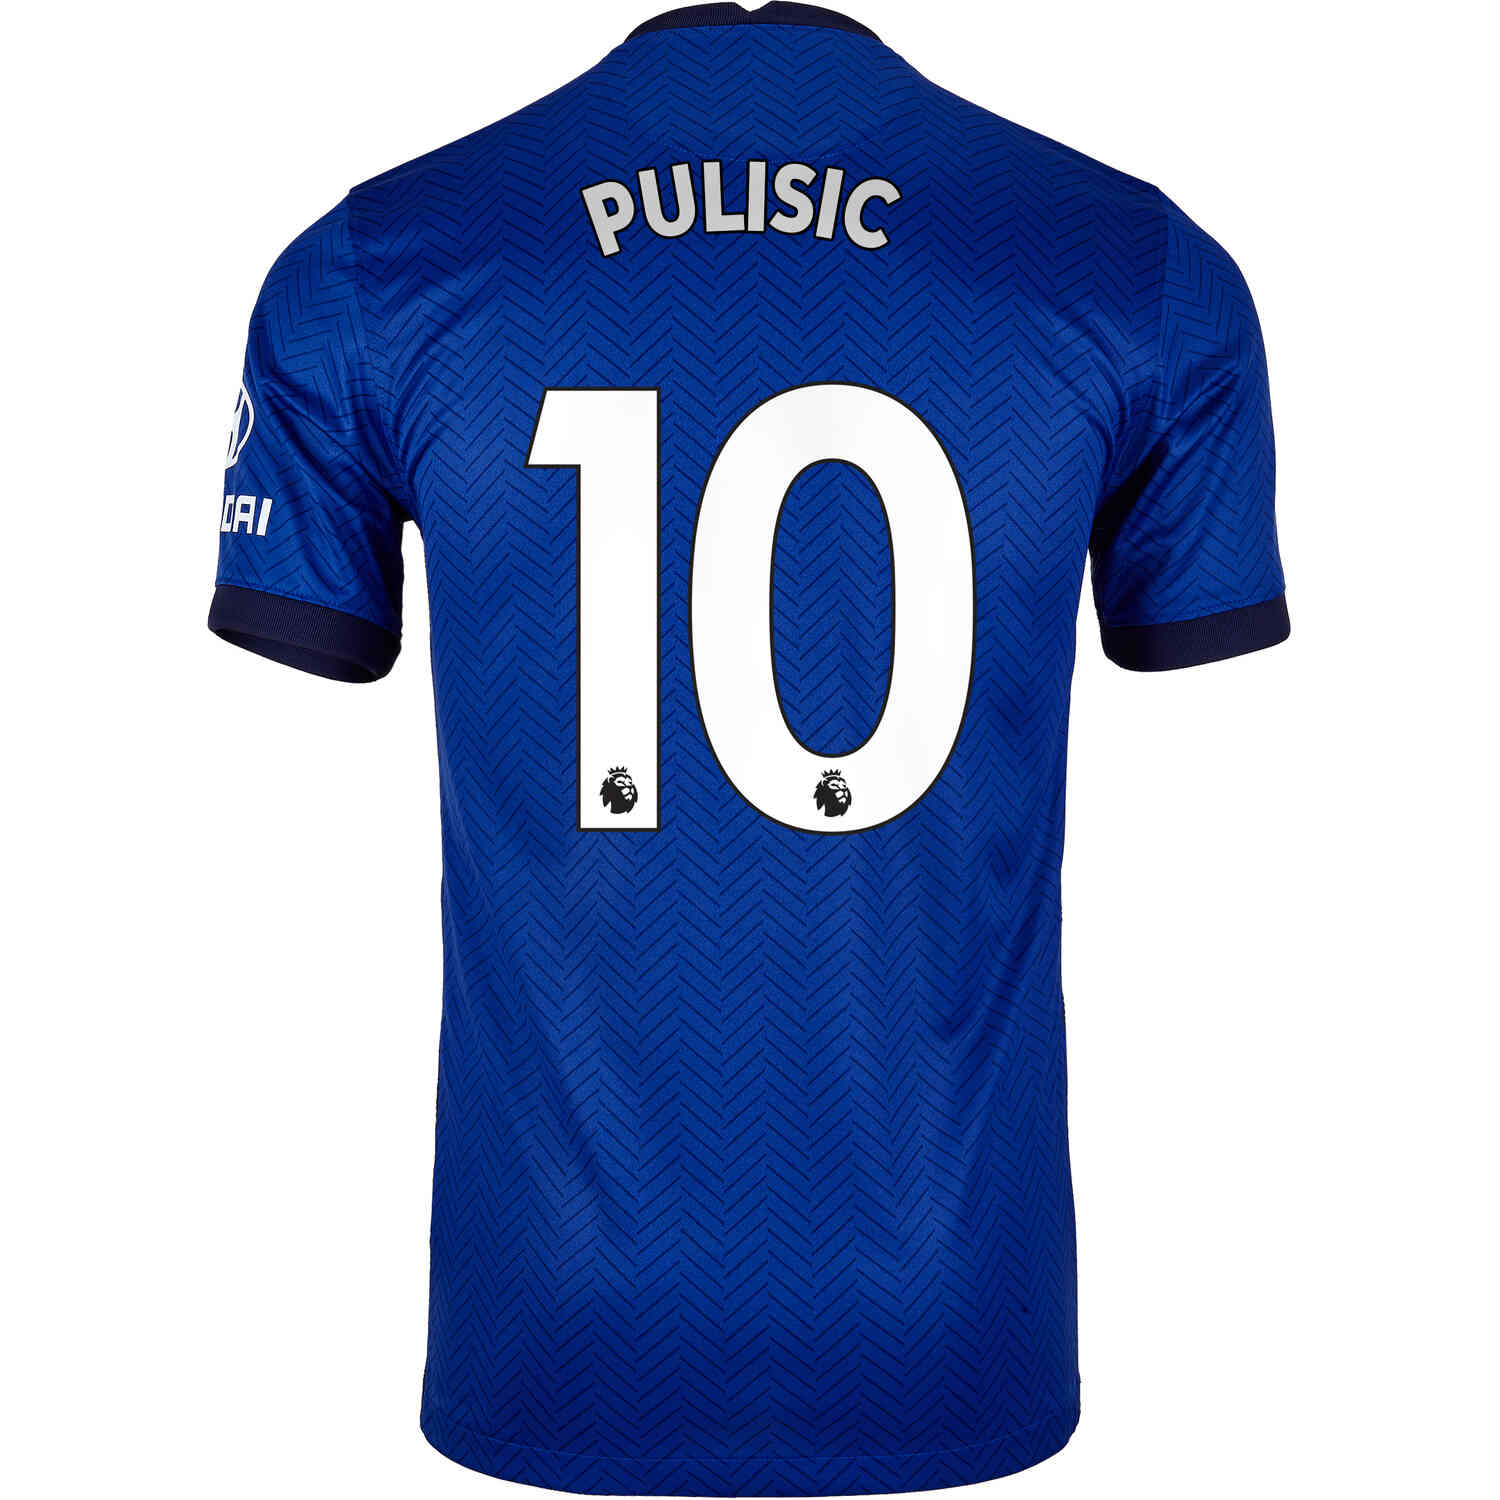 Christian Pulisic Jersey Authentic / 2019/20 Christian Pulisic Chelsea